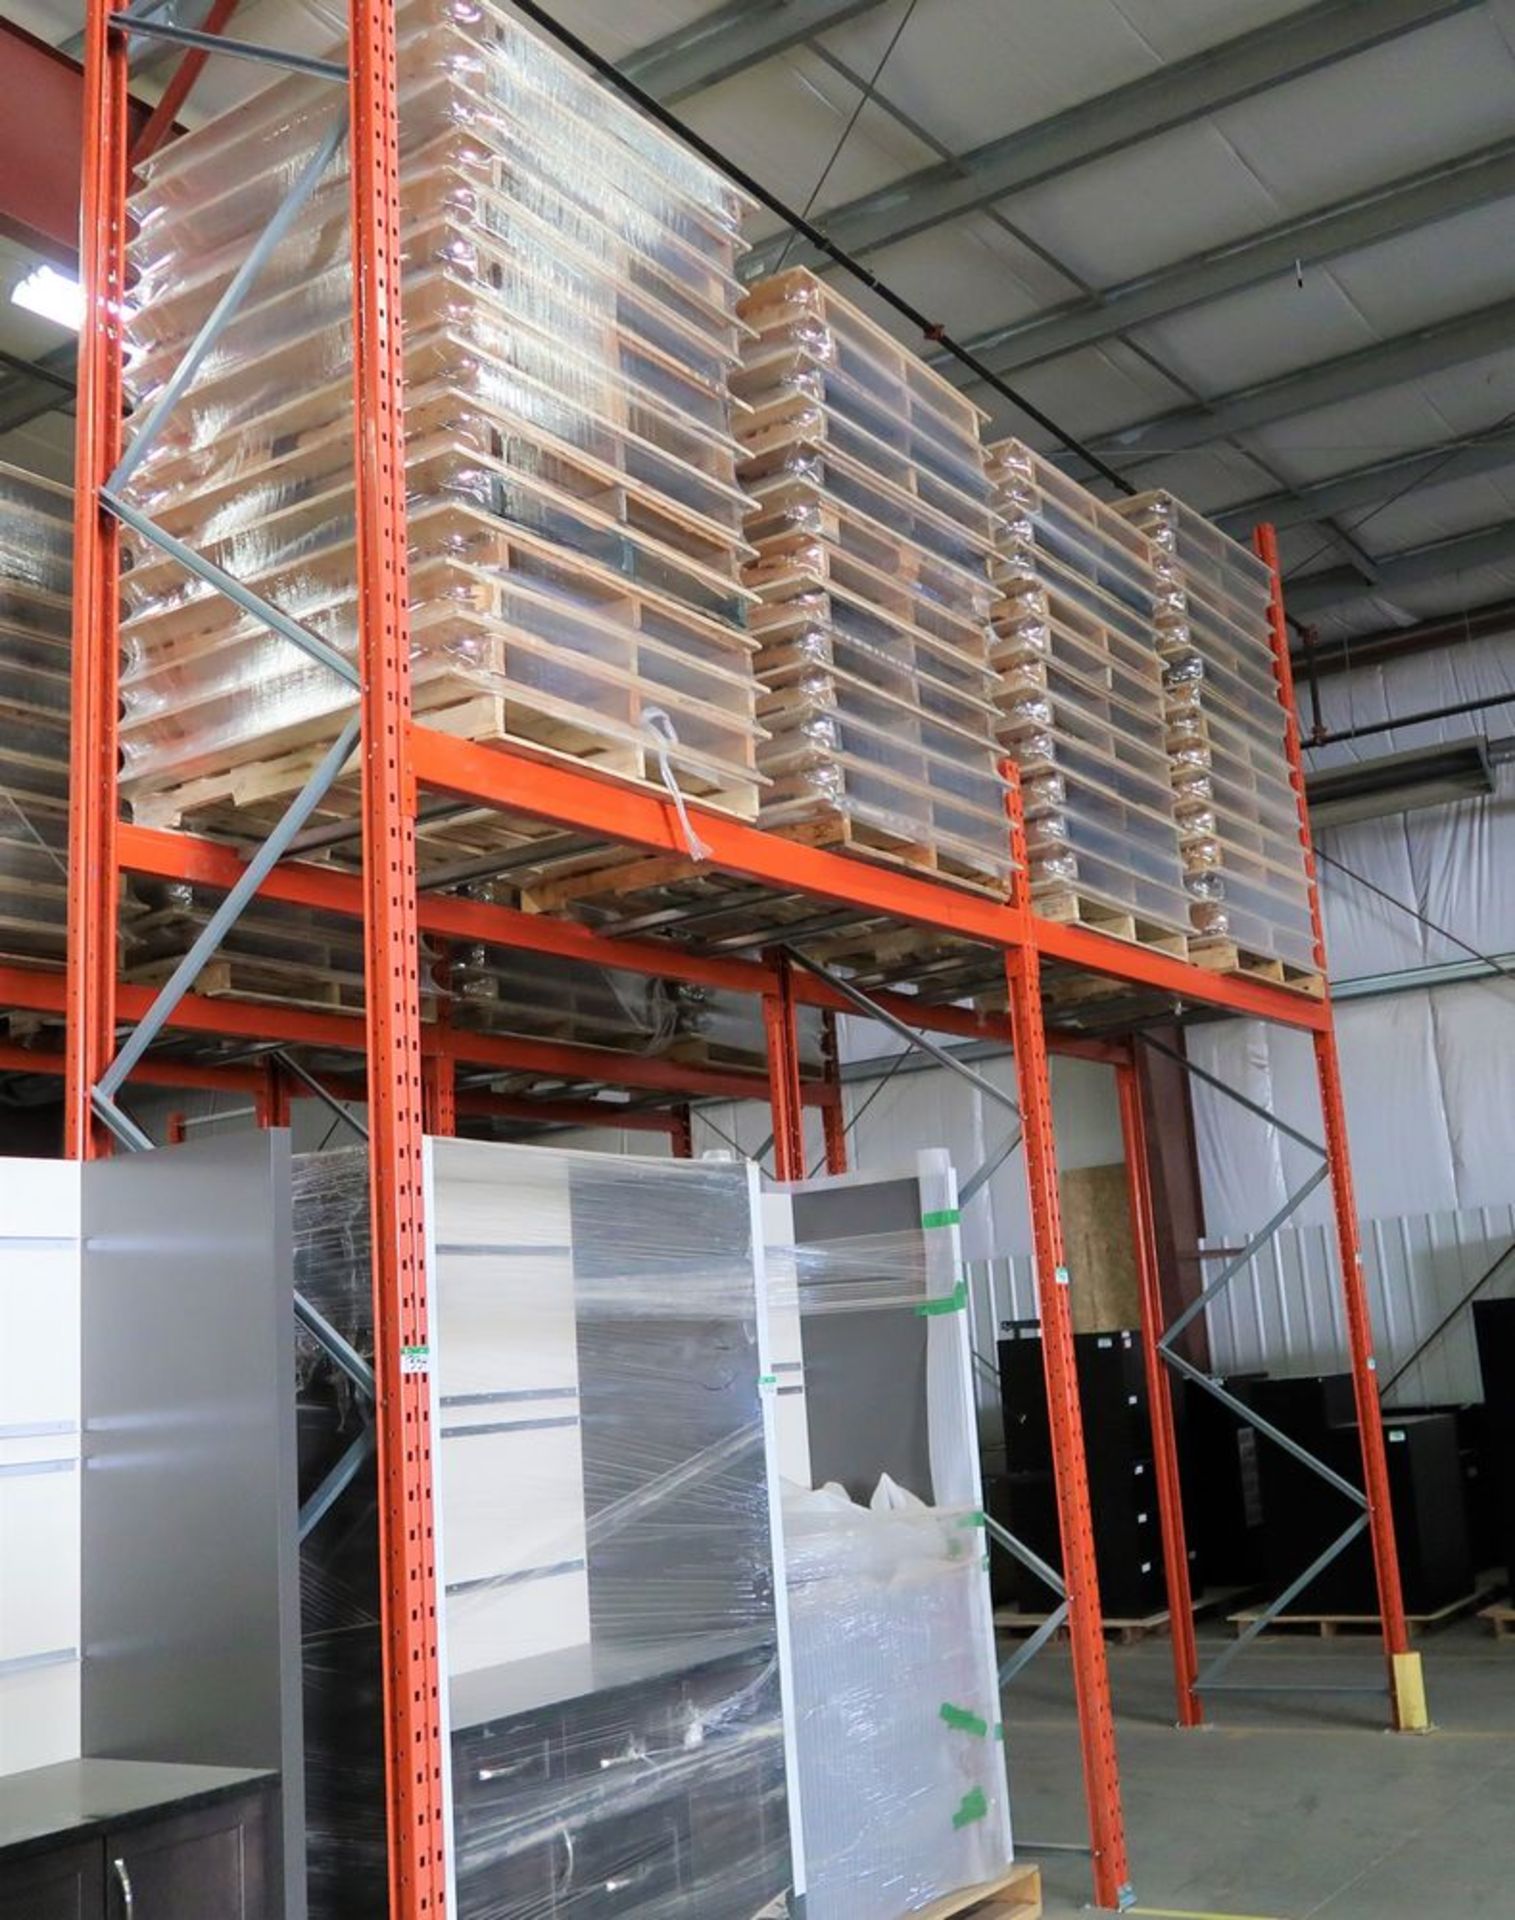 2 SECTIONS OF PALLET RACKING W/ (2) 18' UPRIGHTS, (4) 9' CROSS BEAMS